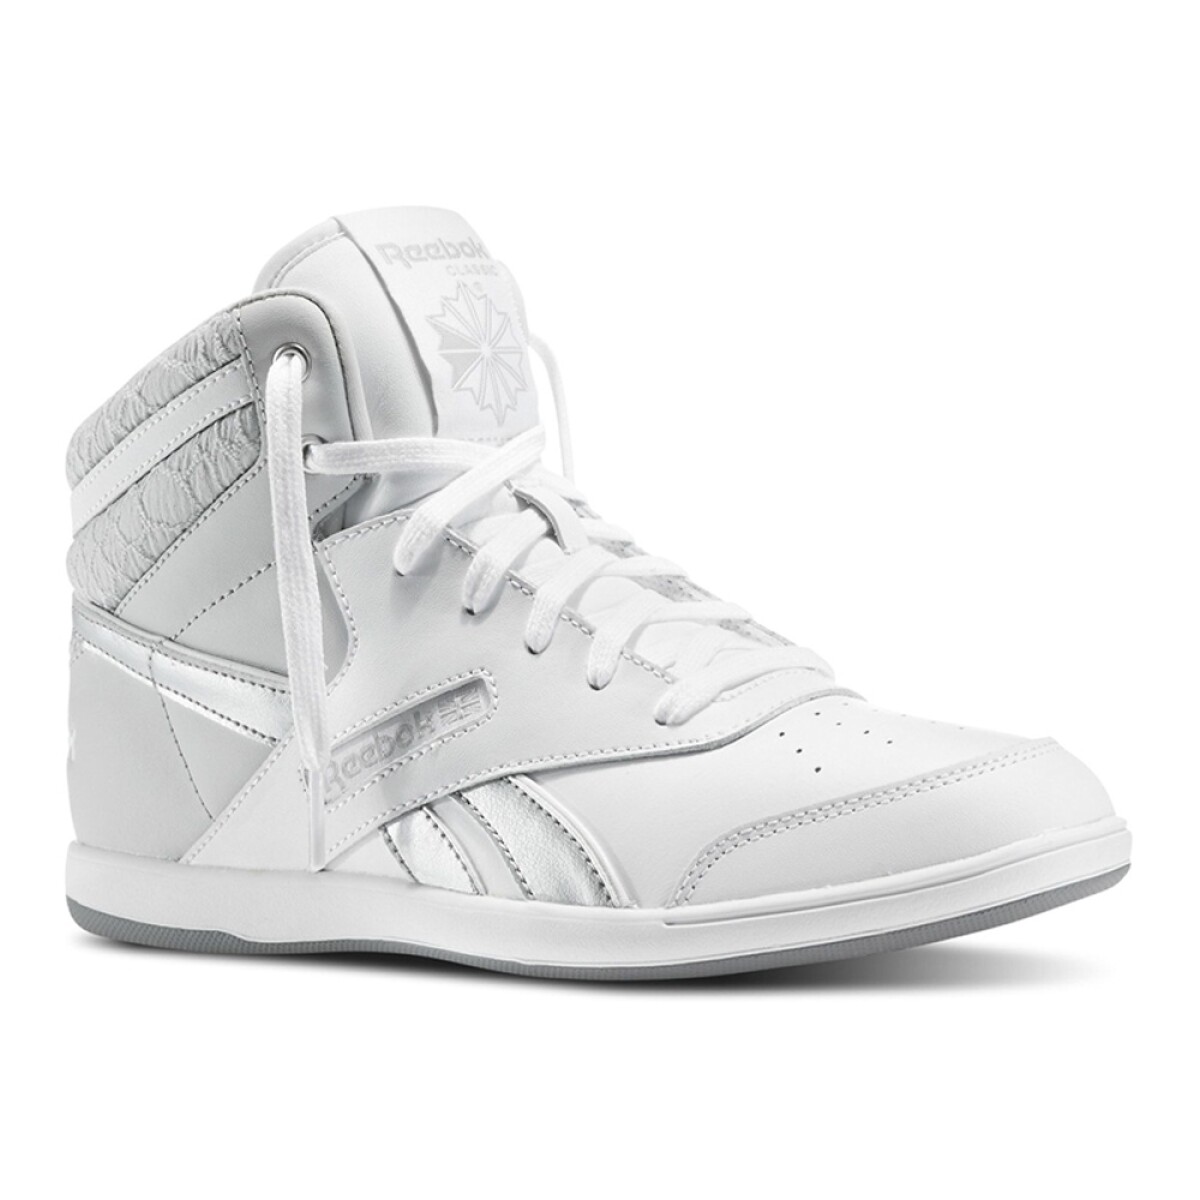 Championes Reebok Mujer BB7700 Mid Night Out M45376 Casual - Blanco 